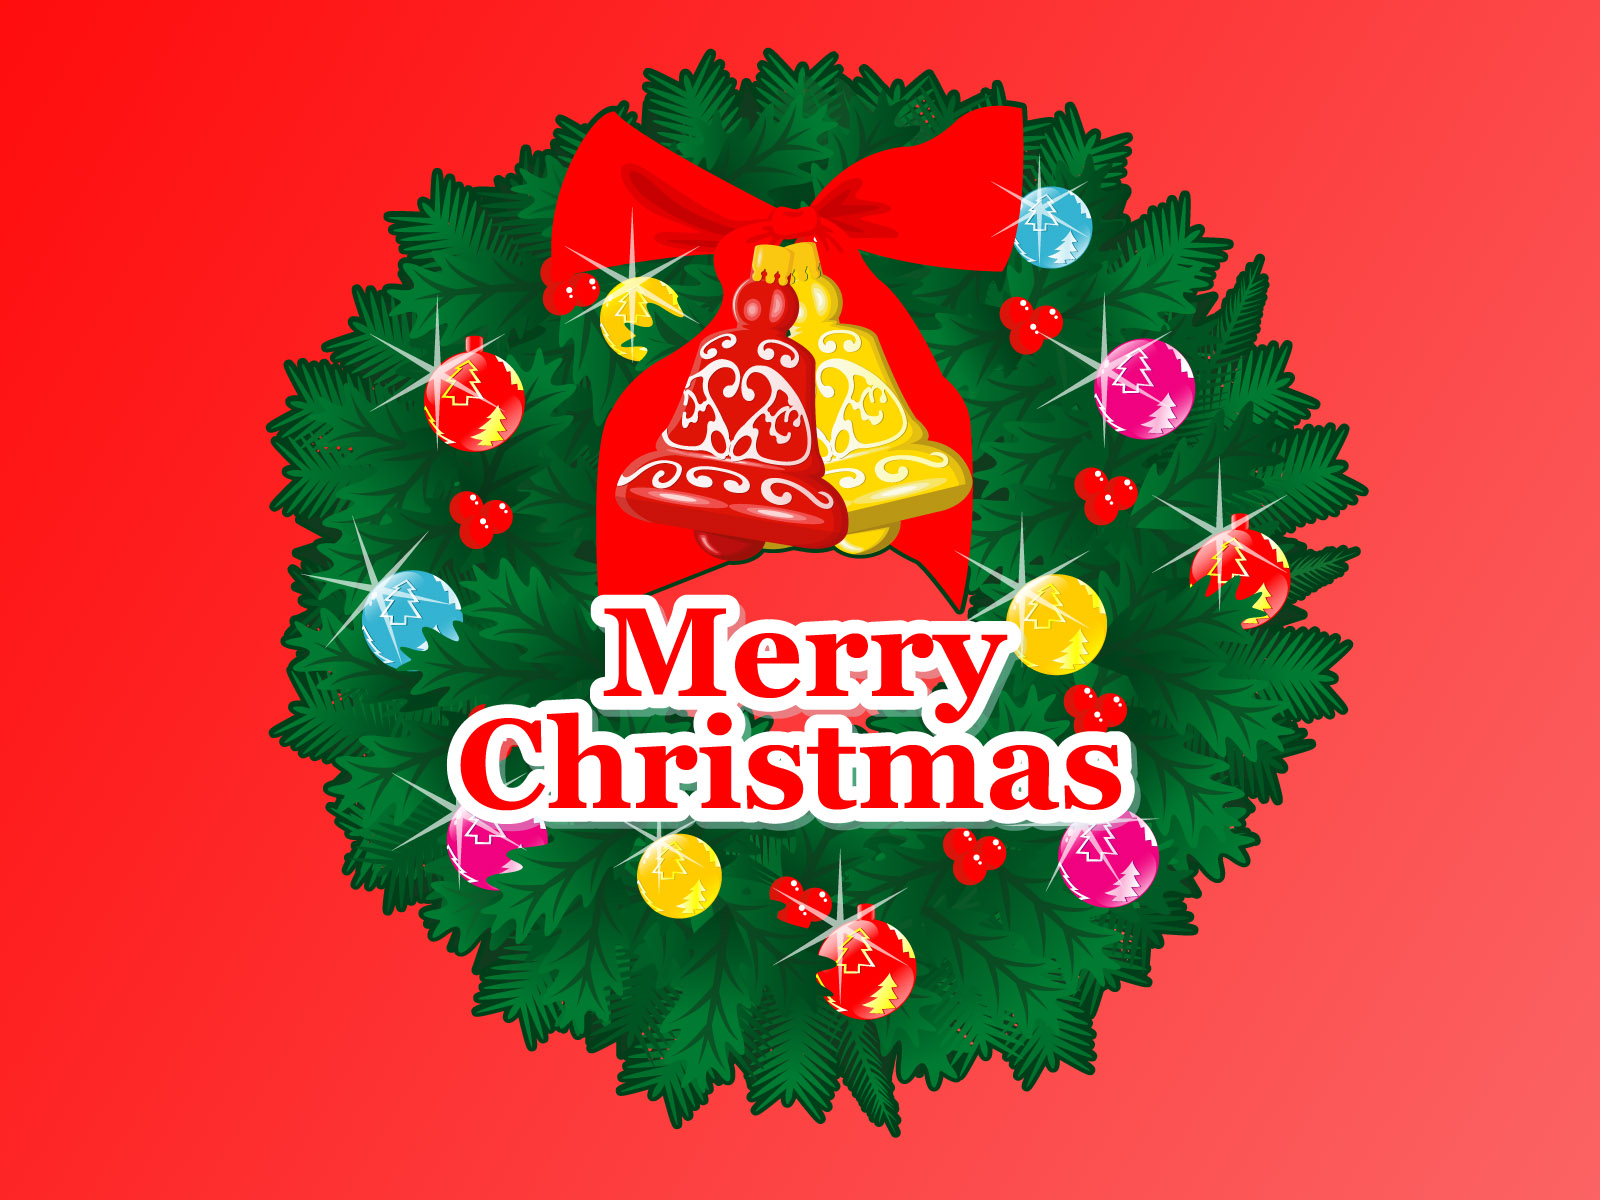 Download HQ Merry Christmas wallpaper / People / 1600x1200